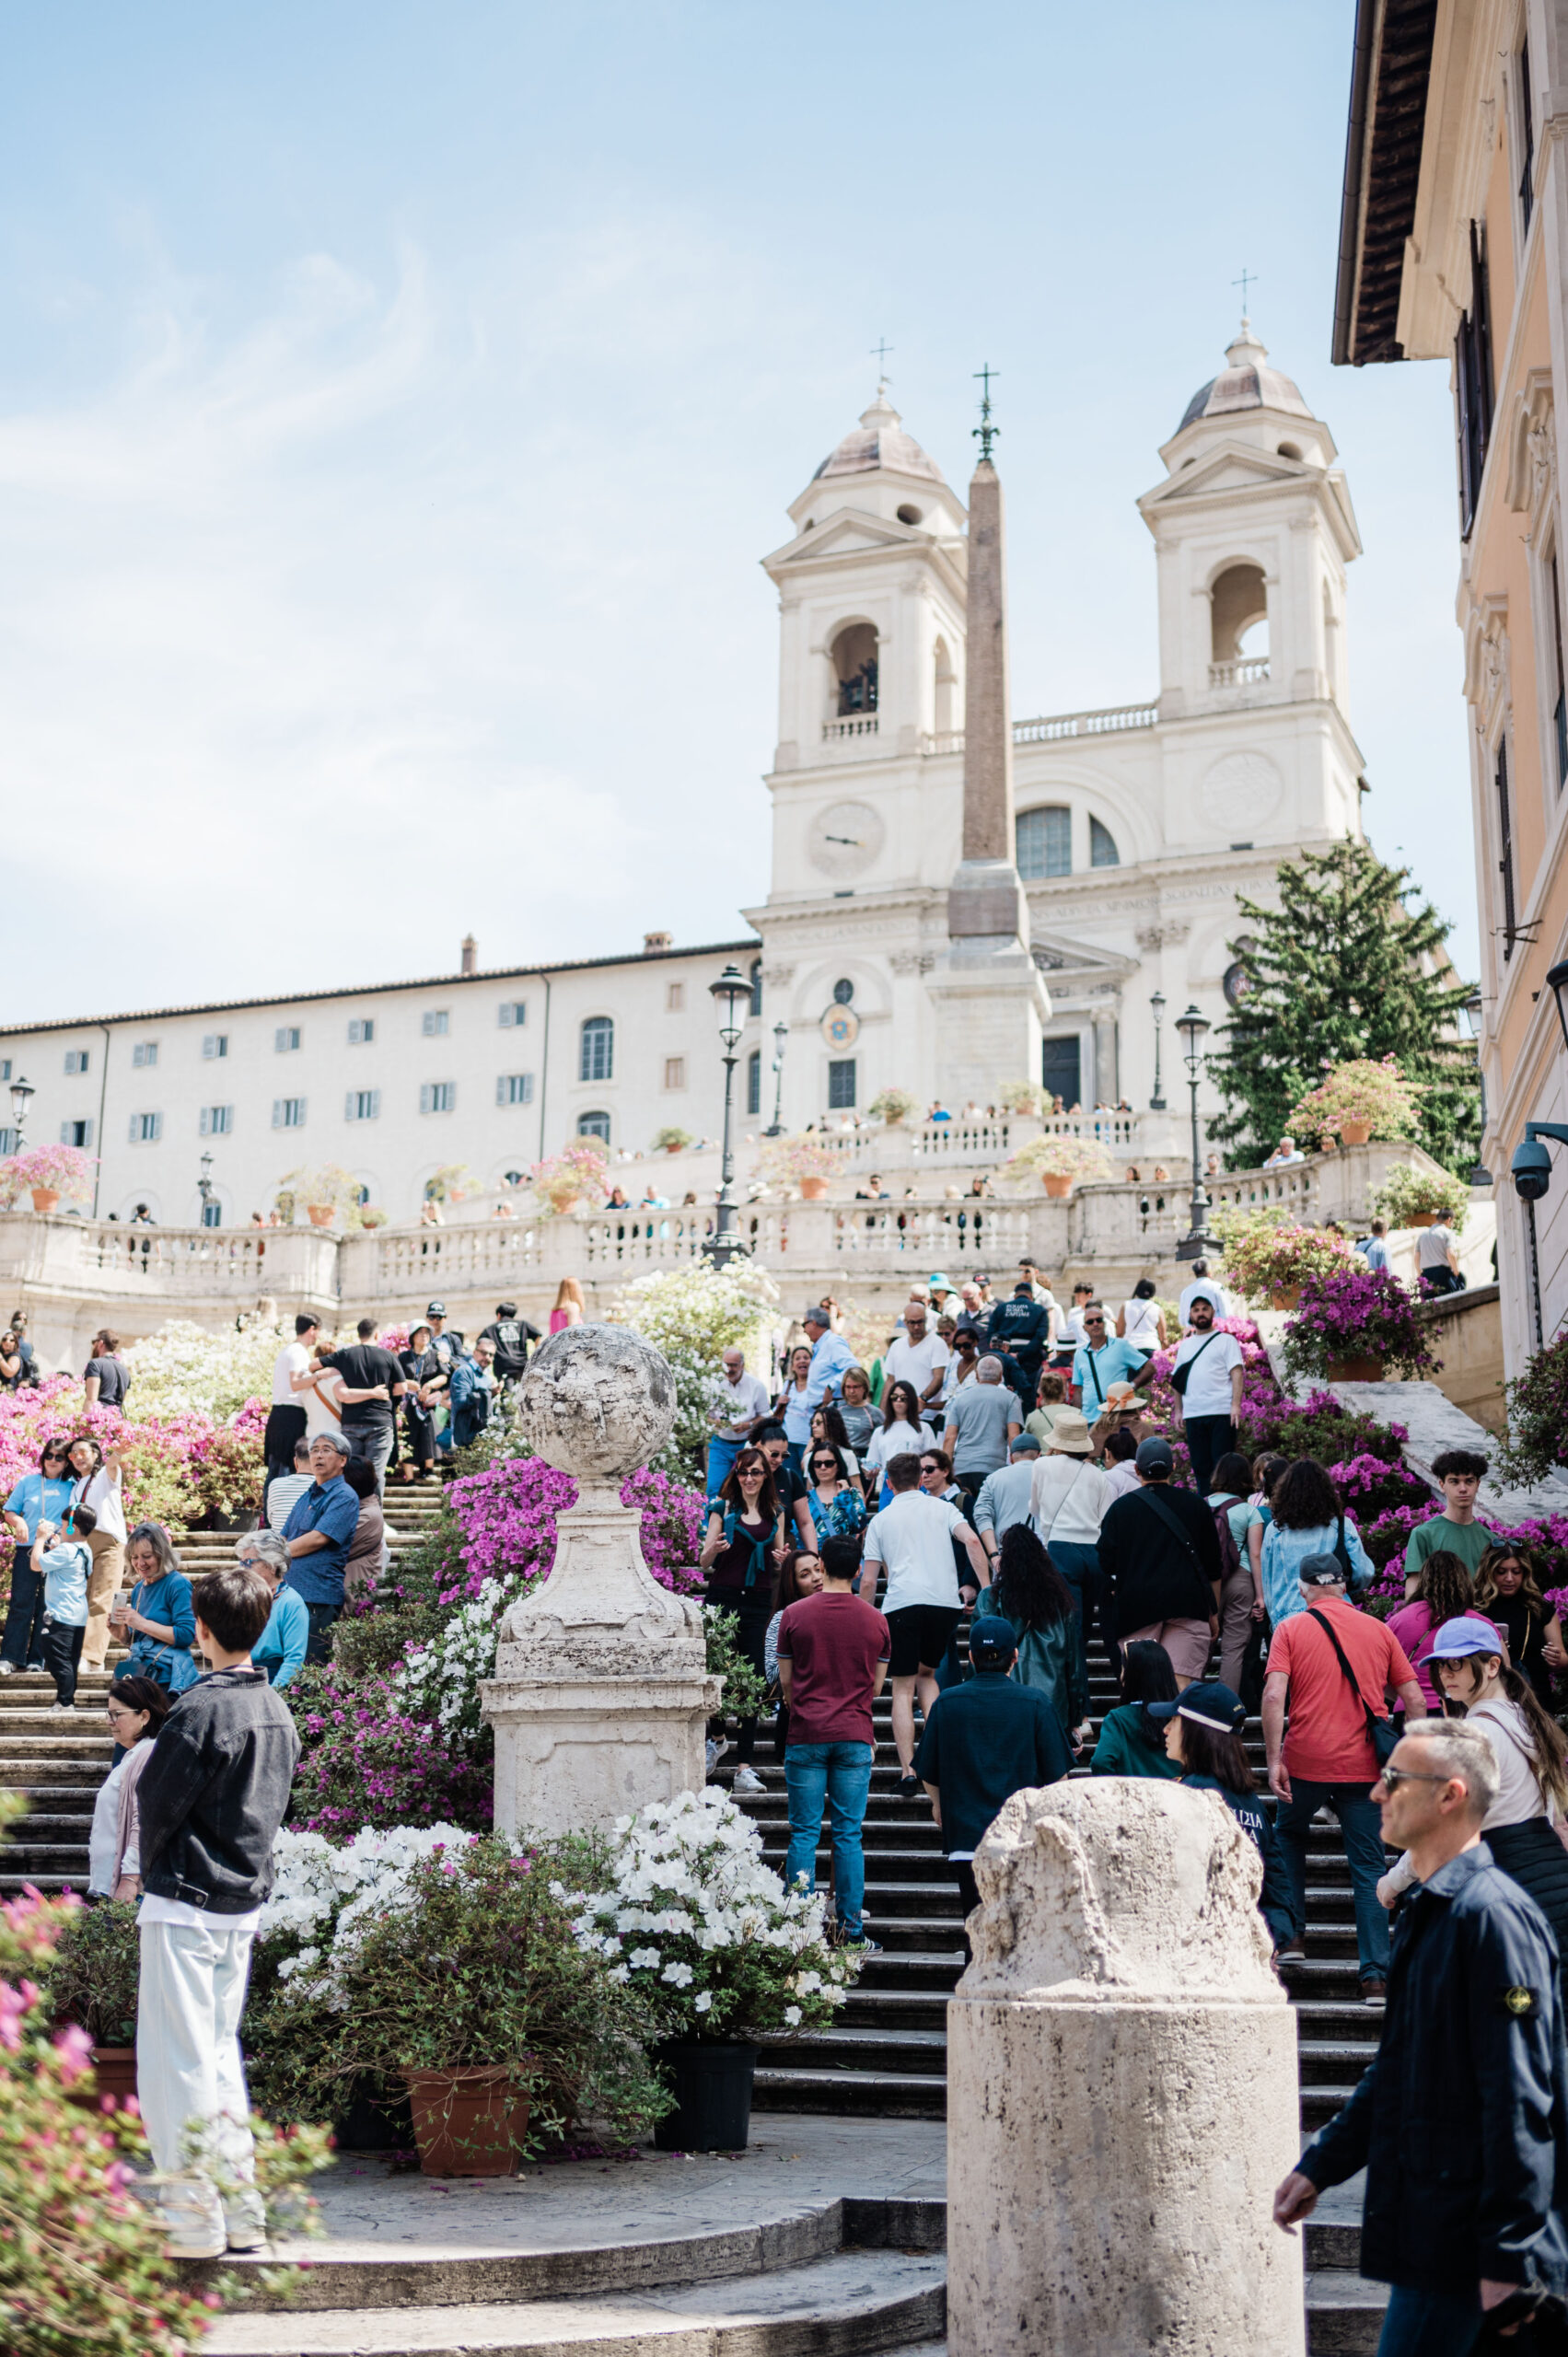 View of the Spanish Steps in Rome, Italy.